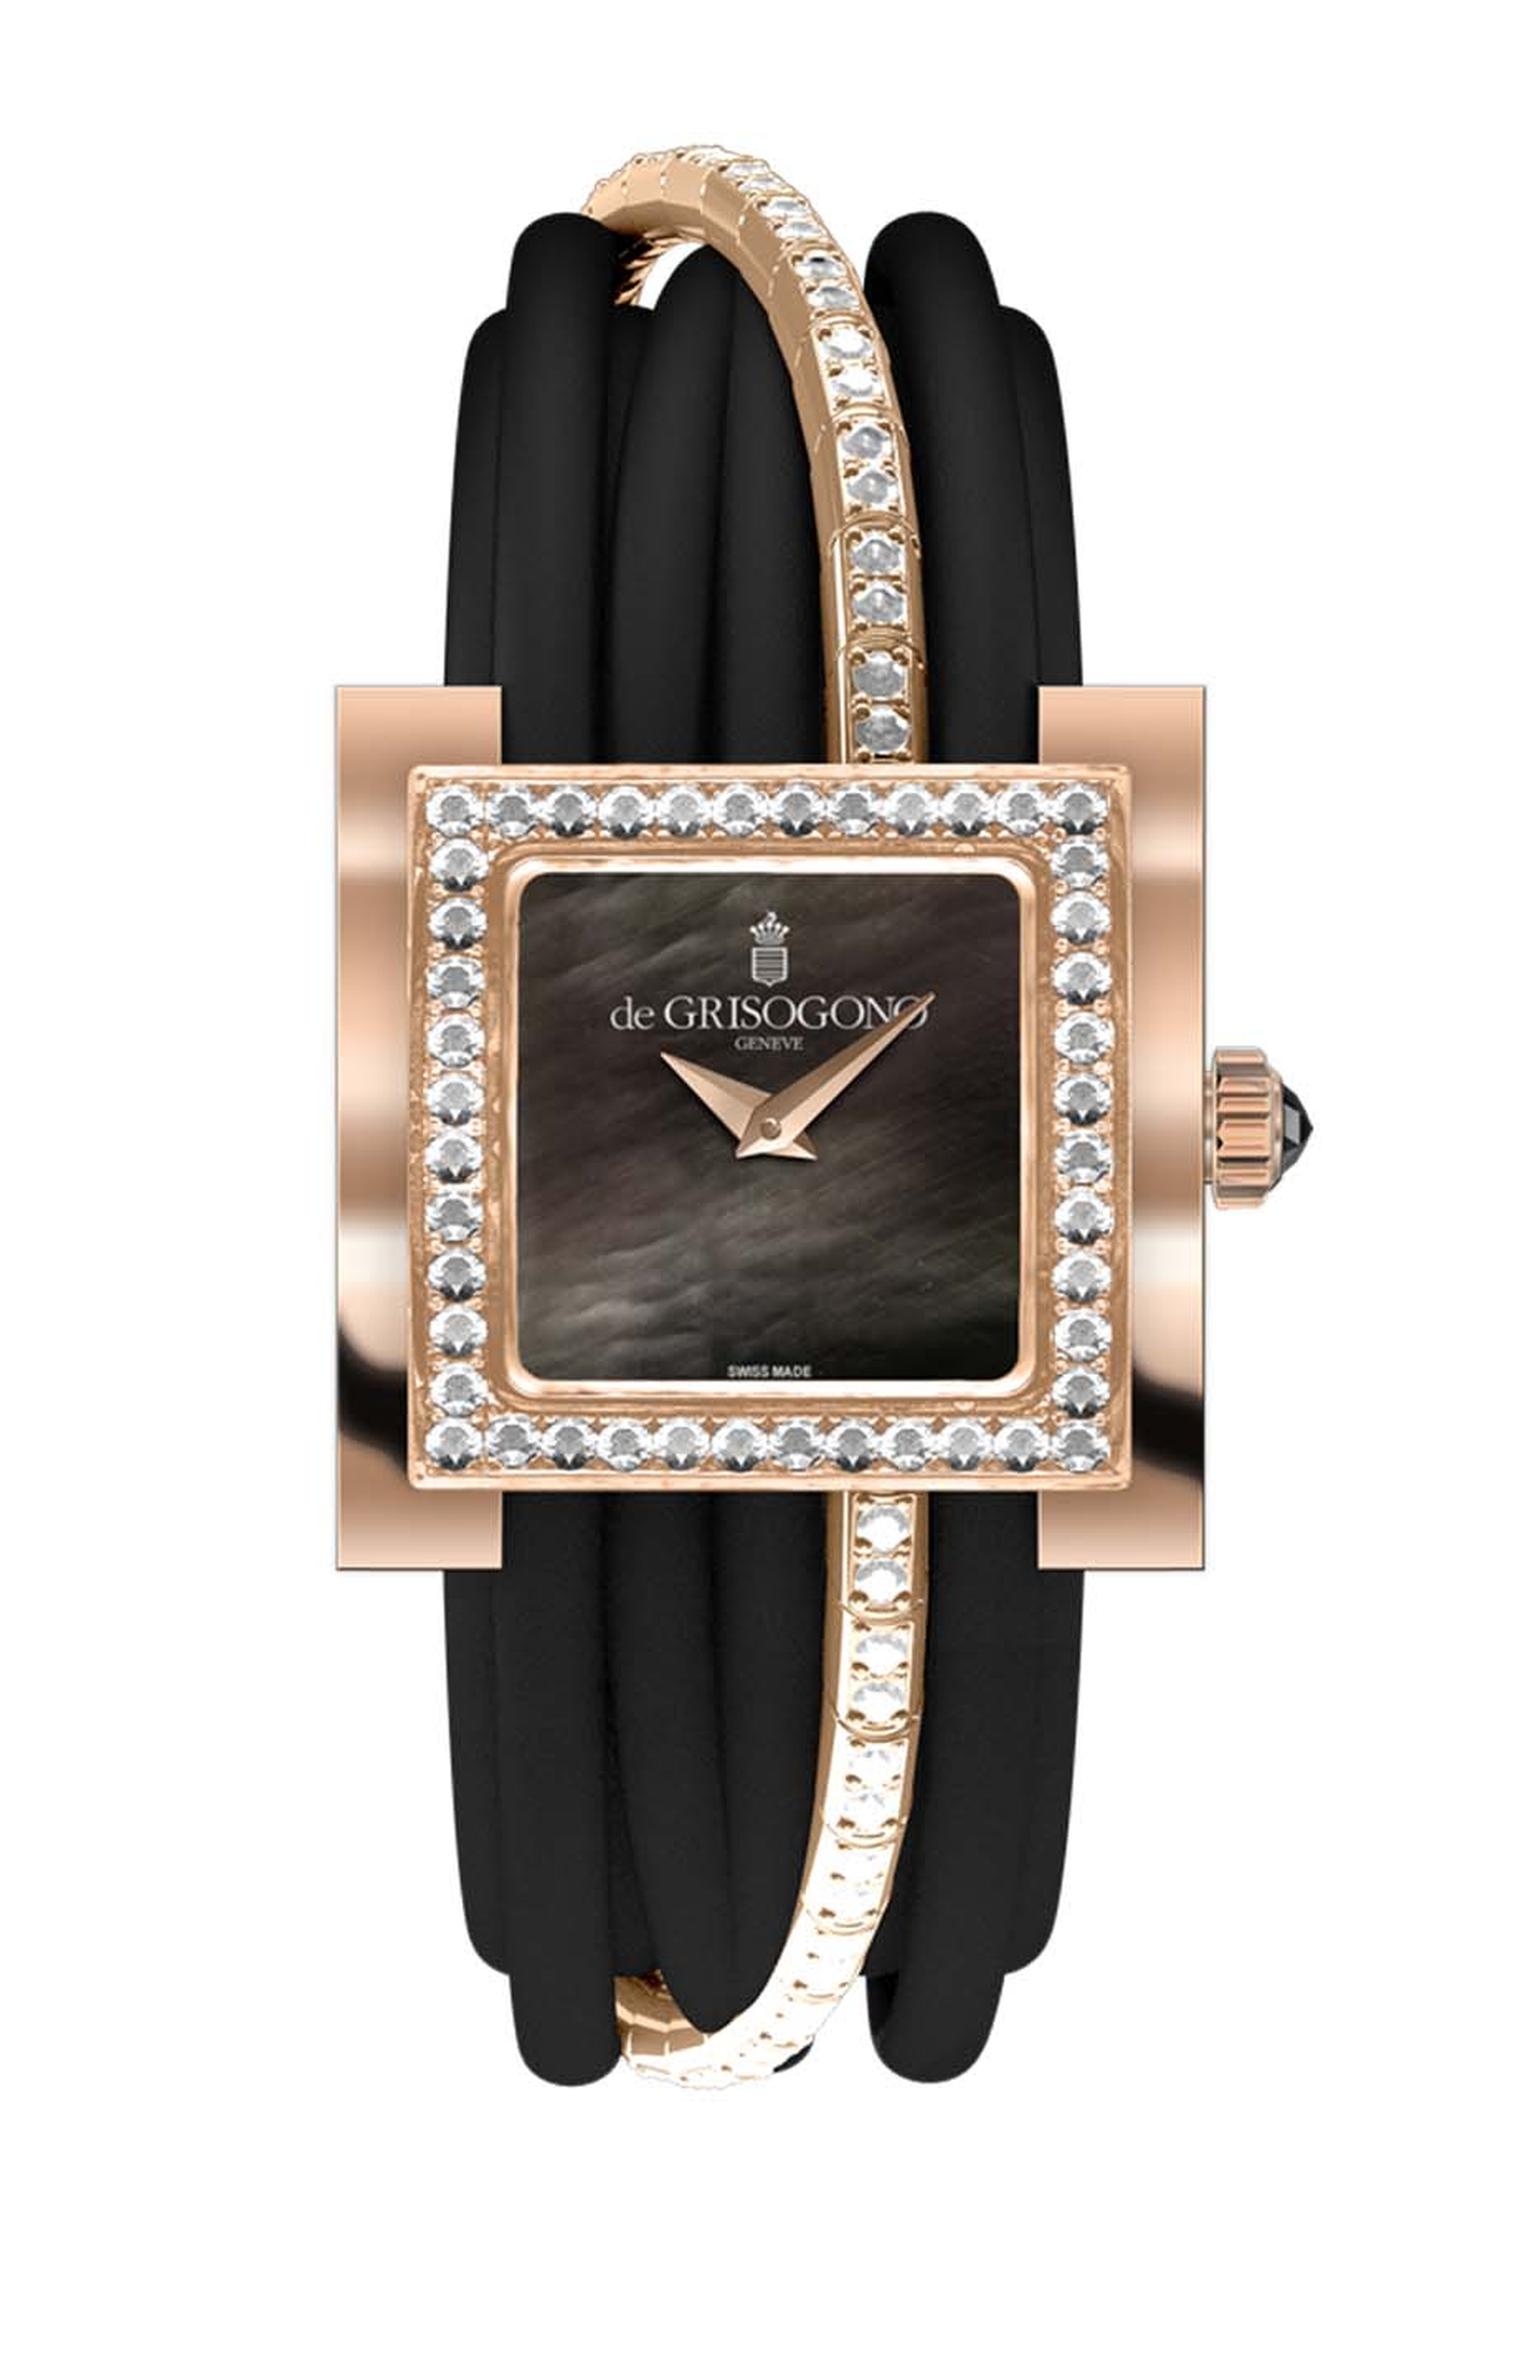 de GRISOGONO Allegra watch in pink gold featuring a black mother-of-pearl dial with pink gold dauphine hands and a bezel set with 44 white diamonds as well as a pink gold clasp set with 40 diamonds